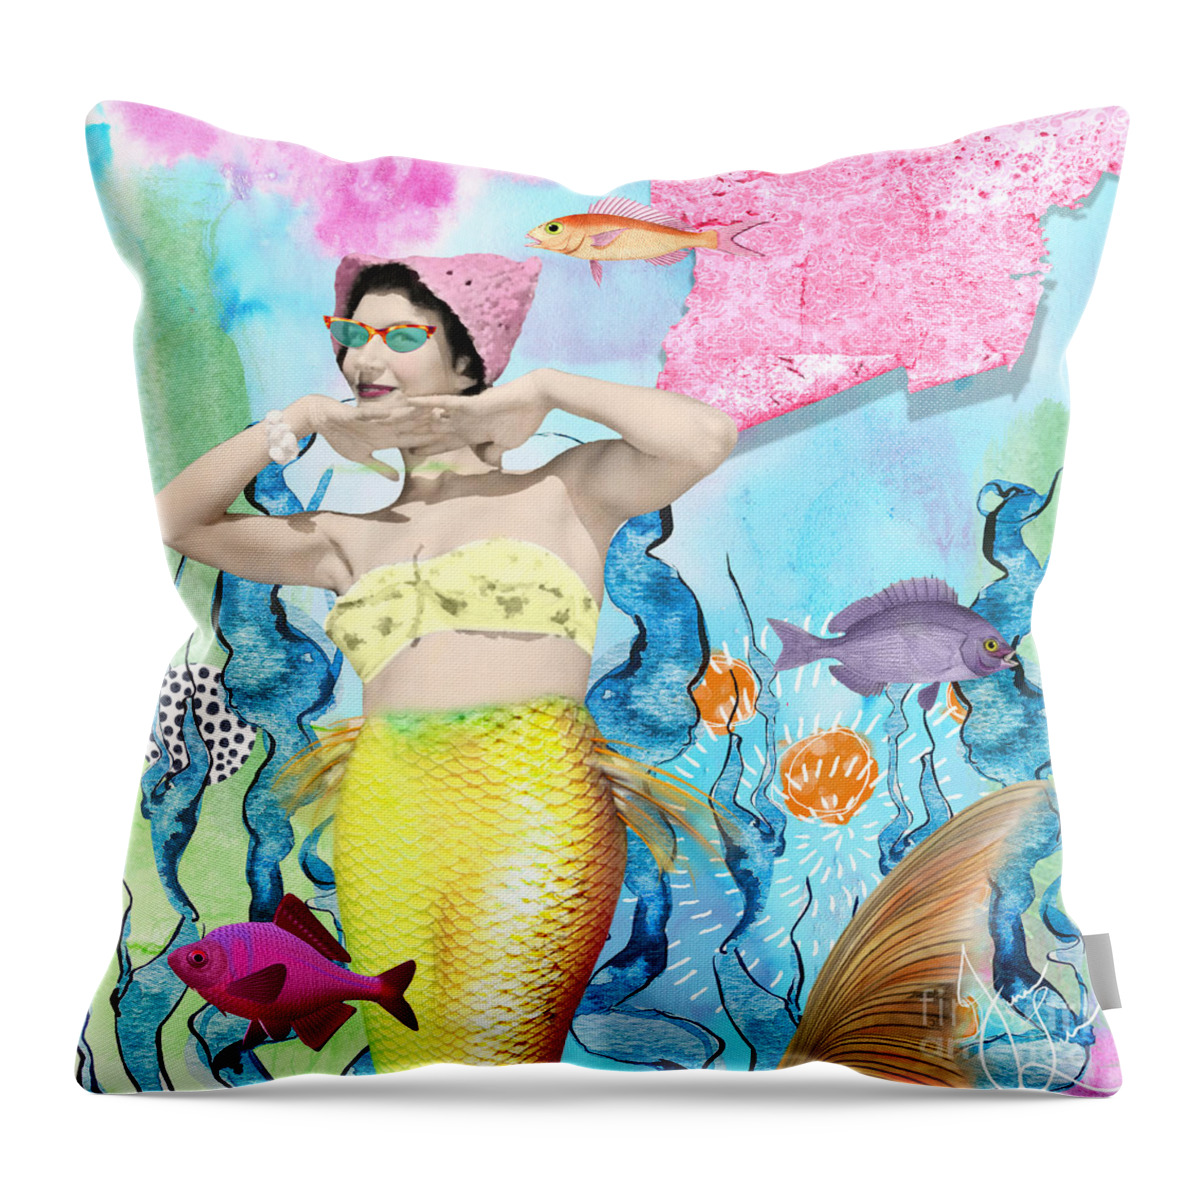 Digital Collage Throw Pillow featuring the digital art Retro Mermaid by Janice Leagra